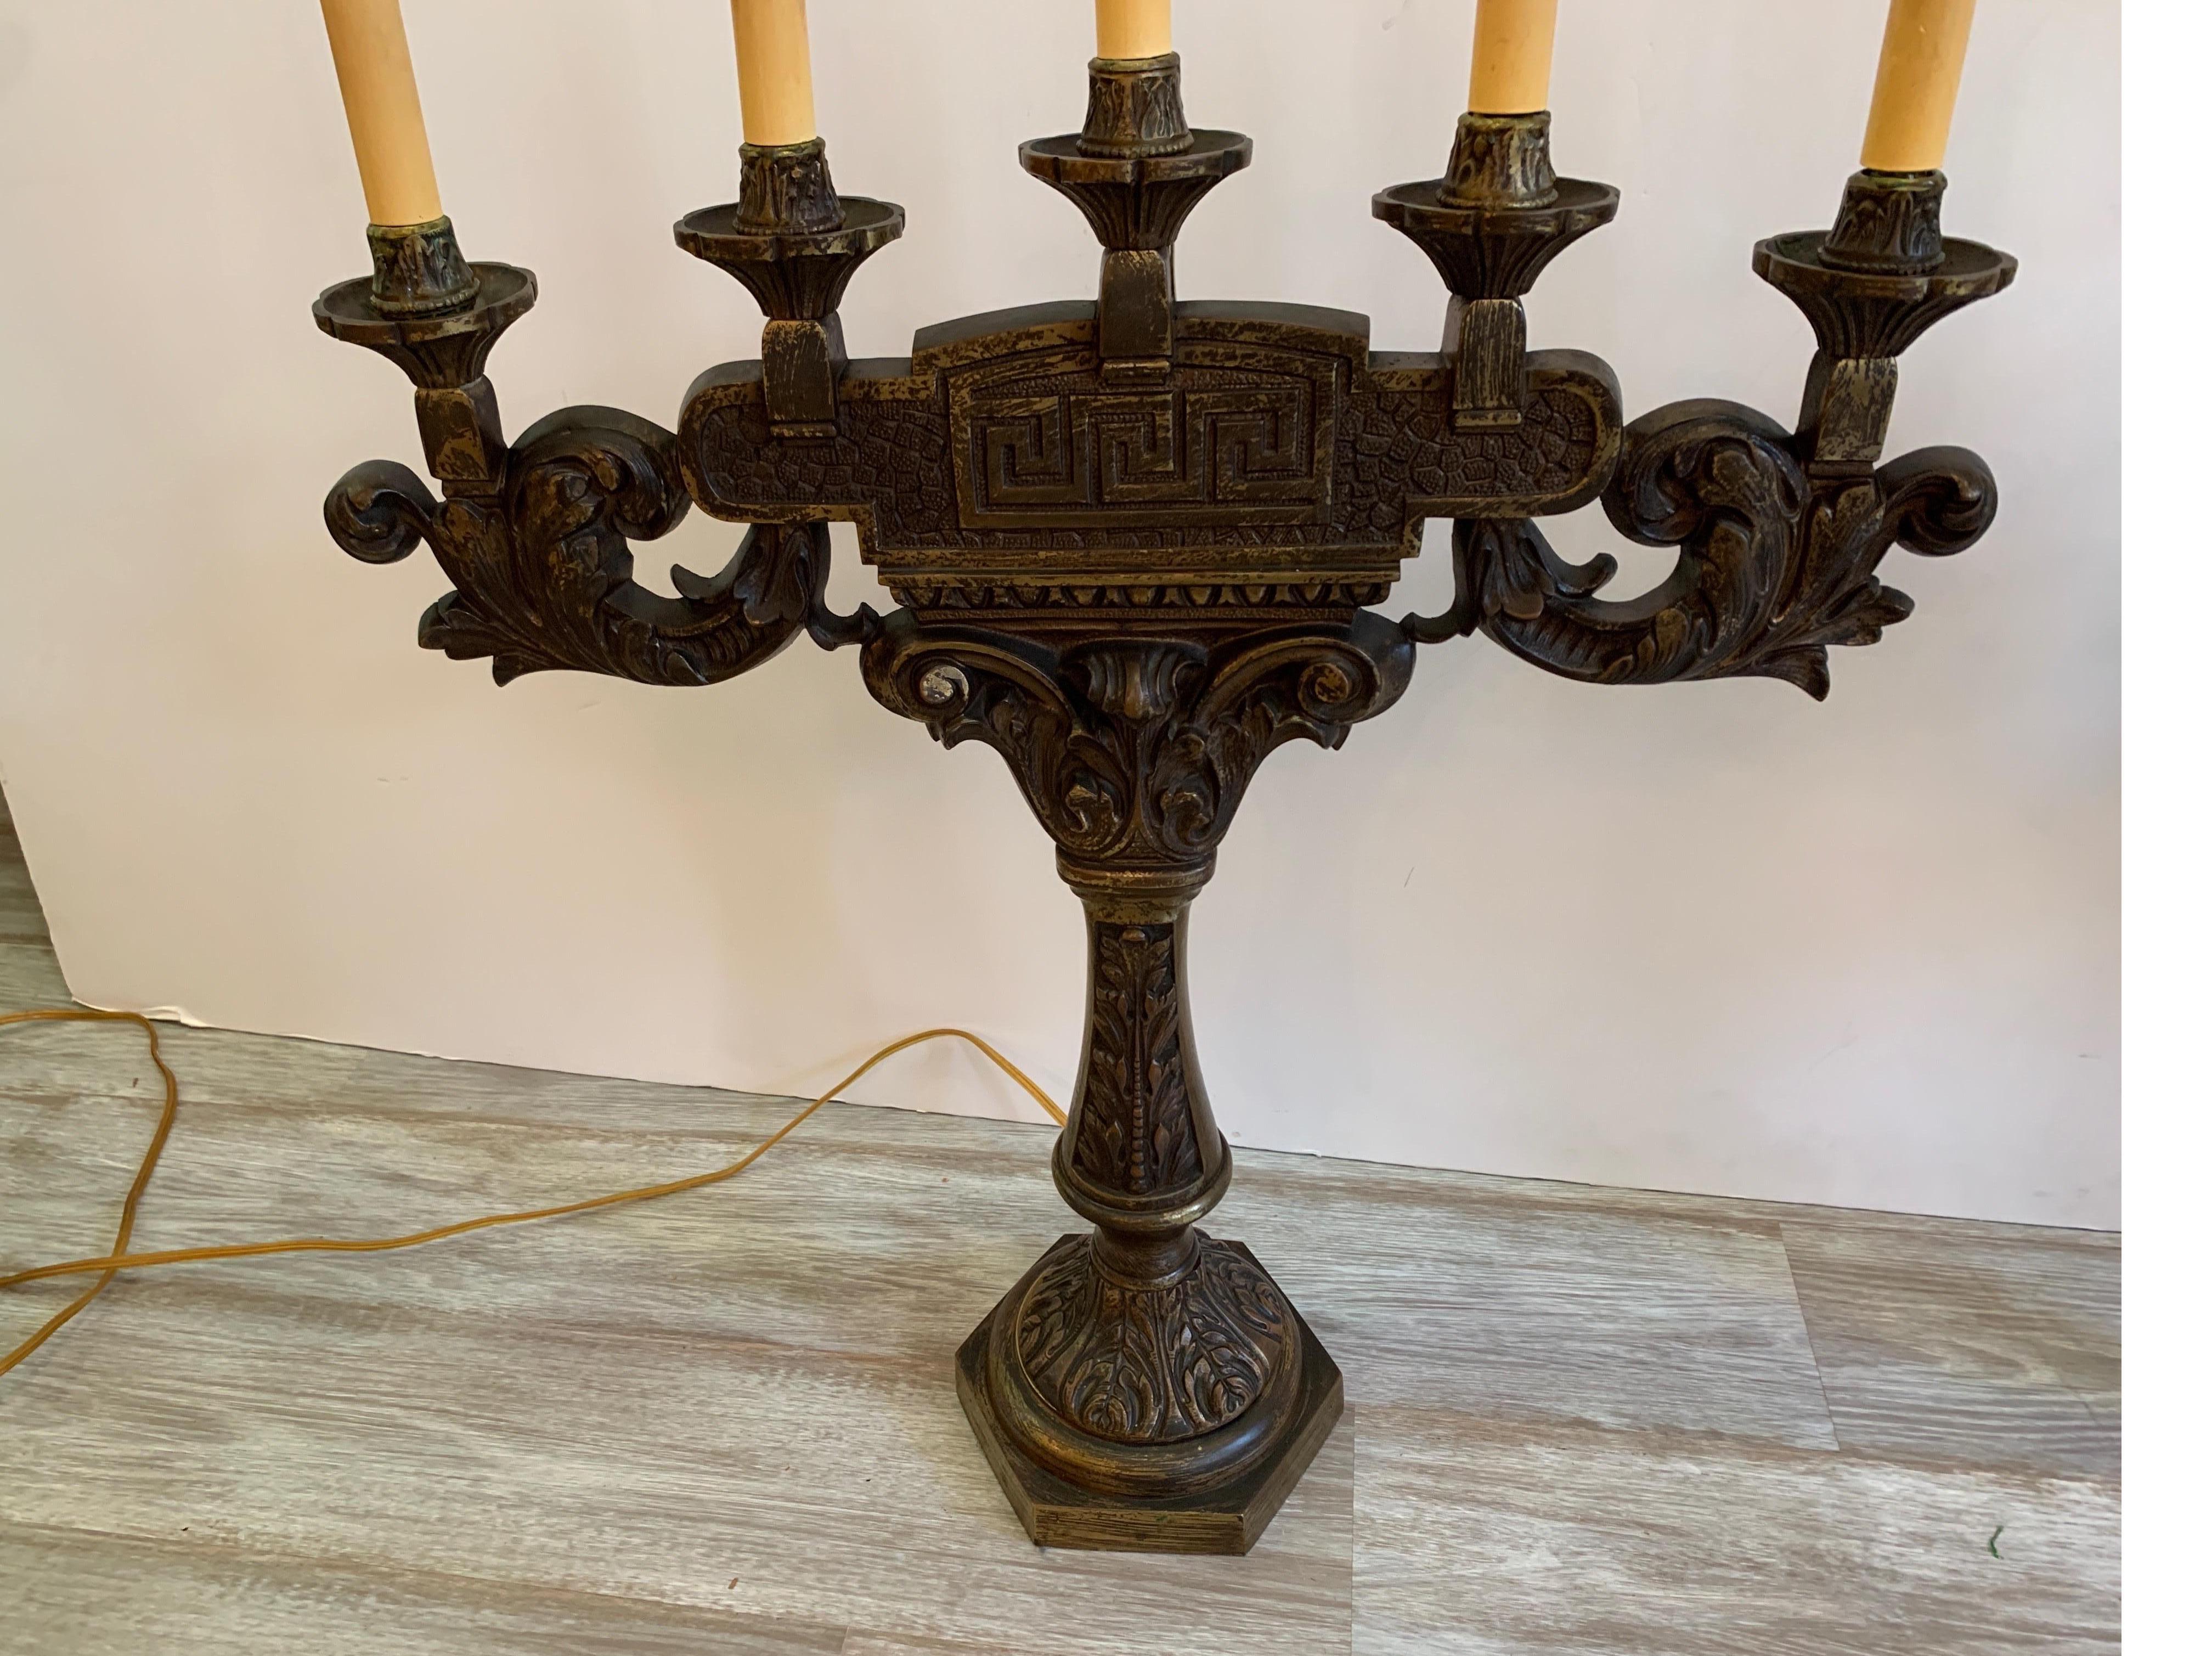 European 19th Century Bronze Candelabras Now Electrified Can Be Converted Back to Candles For Sale